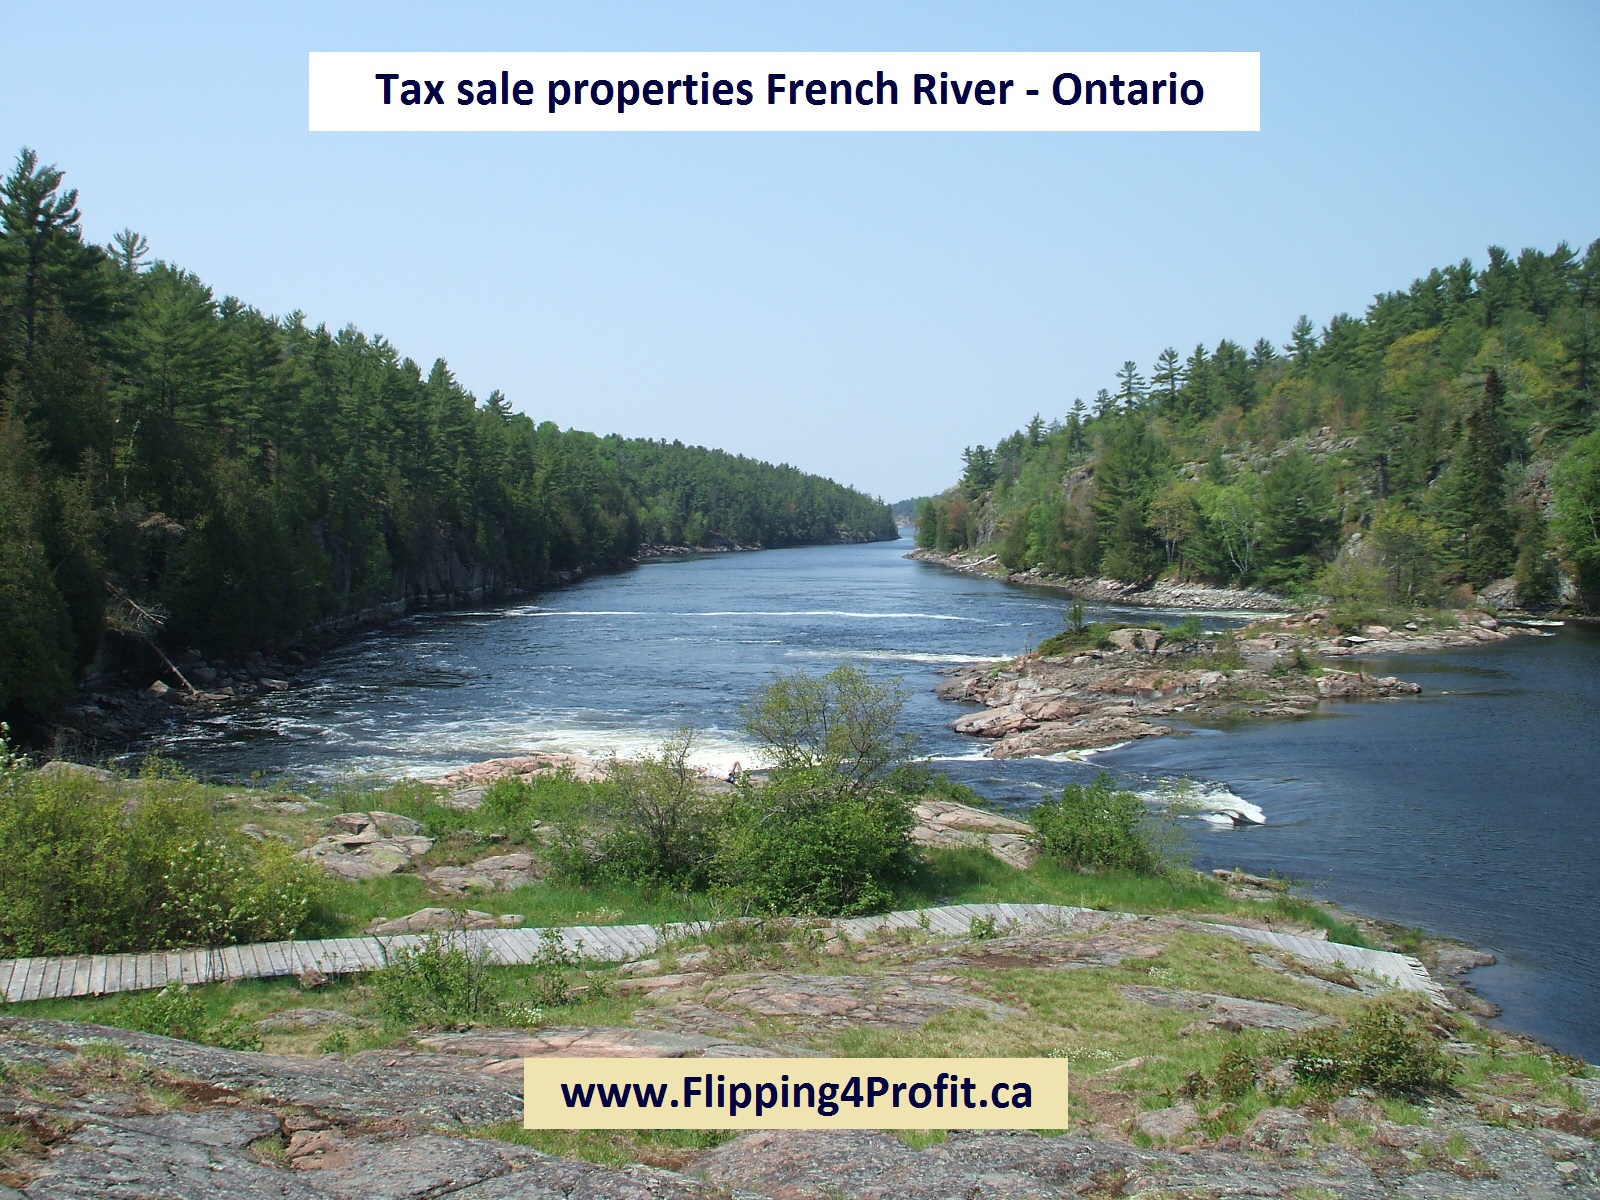 Tax sale properties French River - Ontario